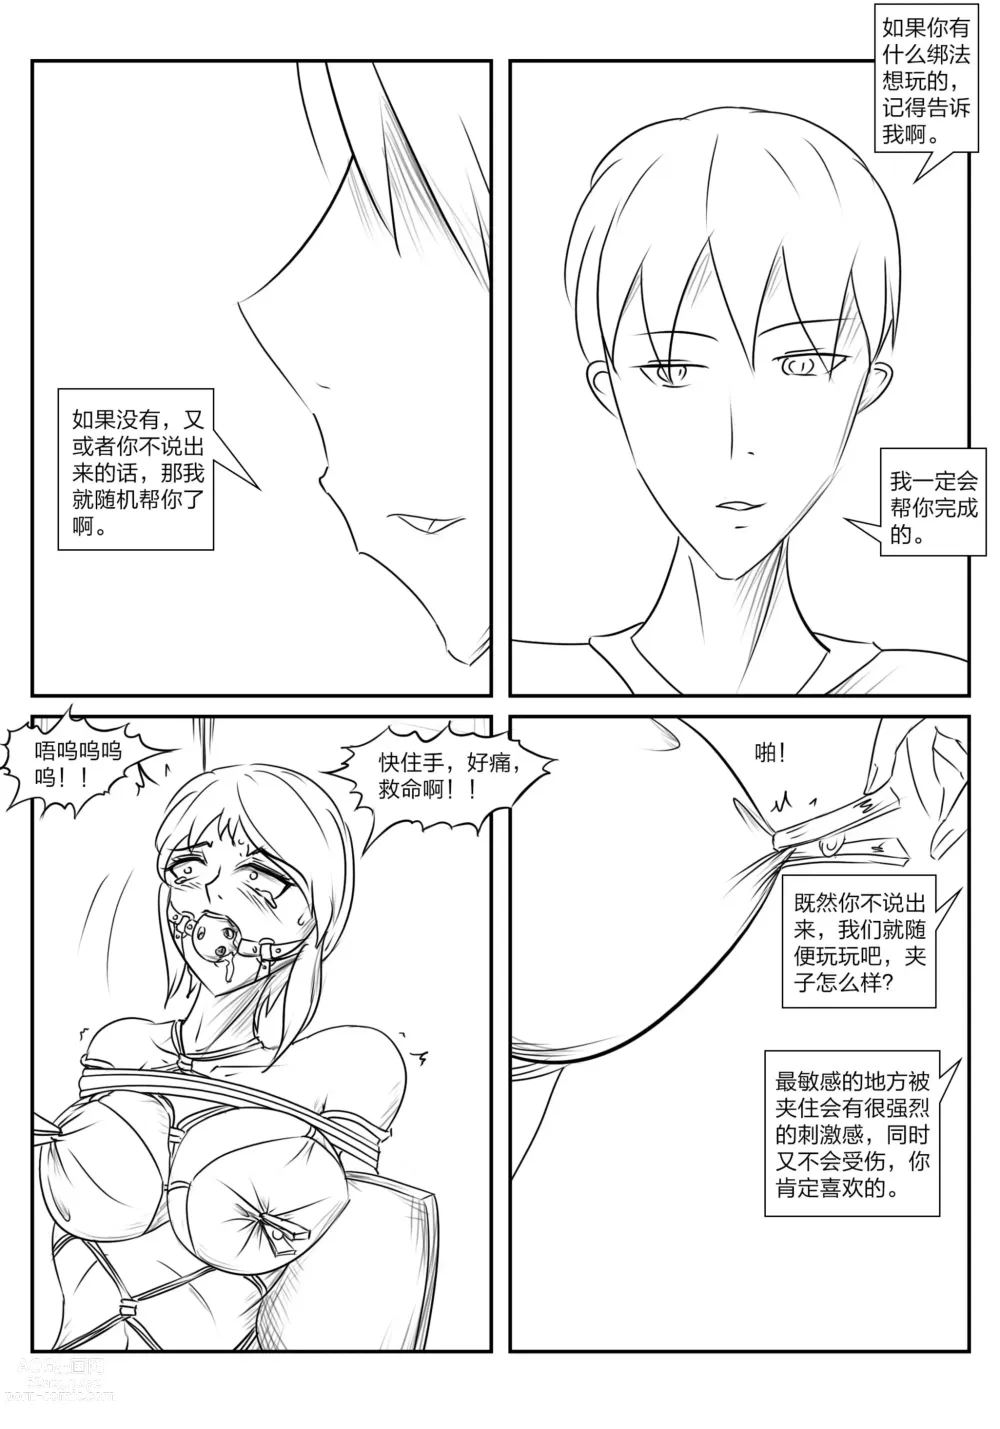 Page 44 of doujinshi The crisis in public self bondage